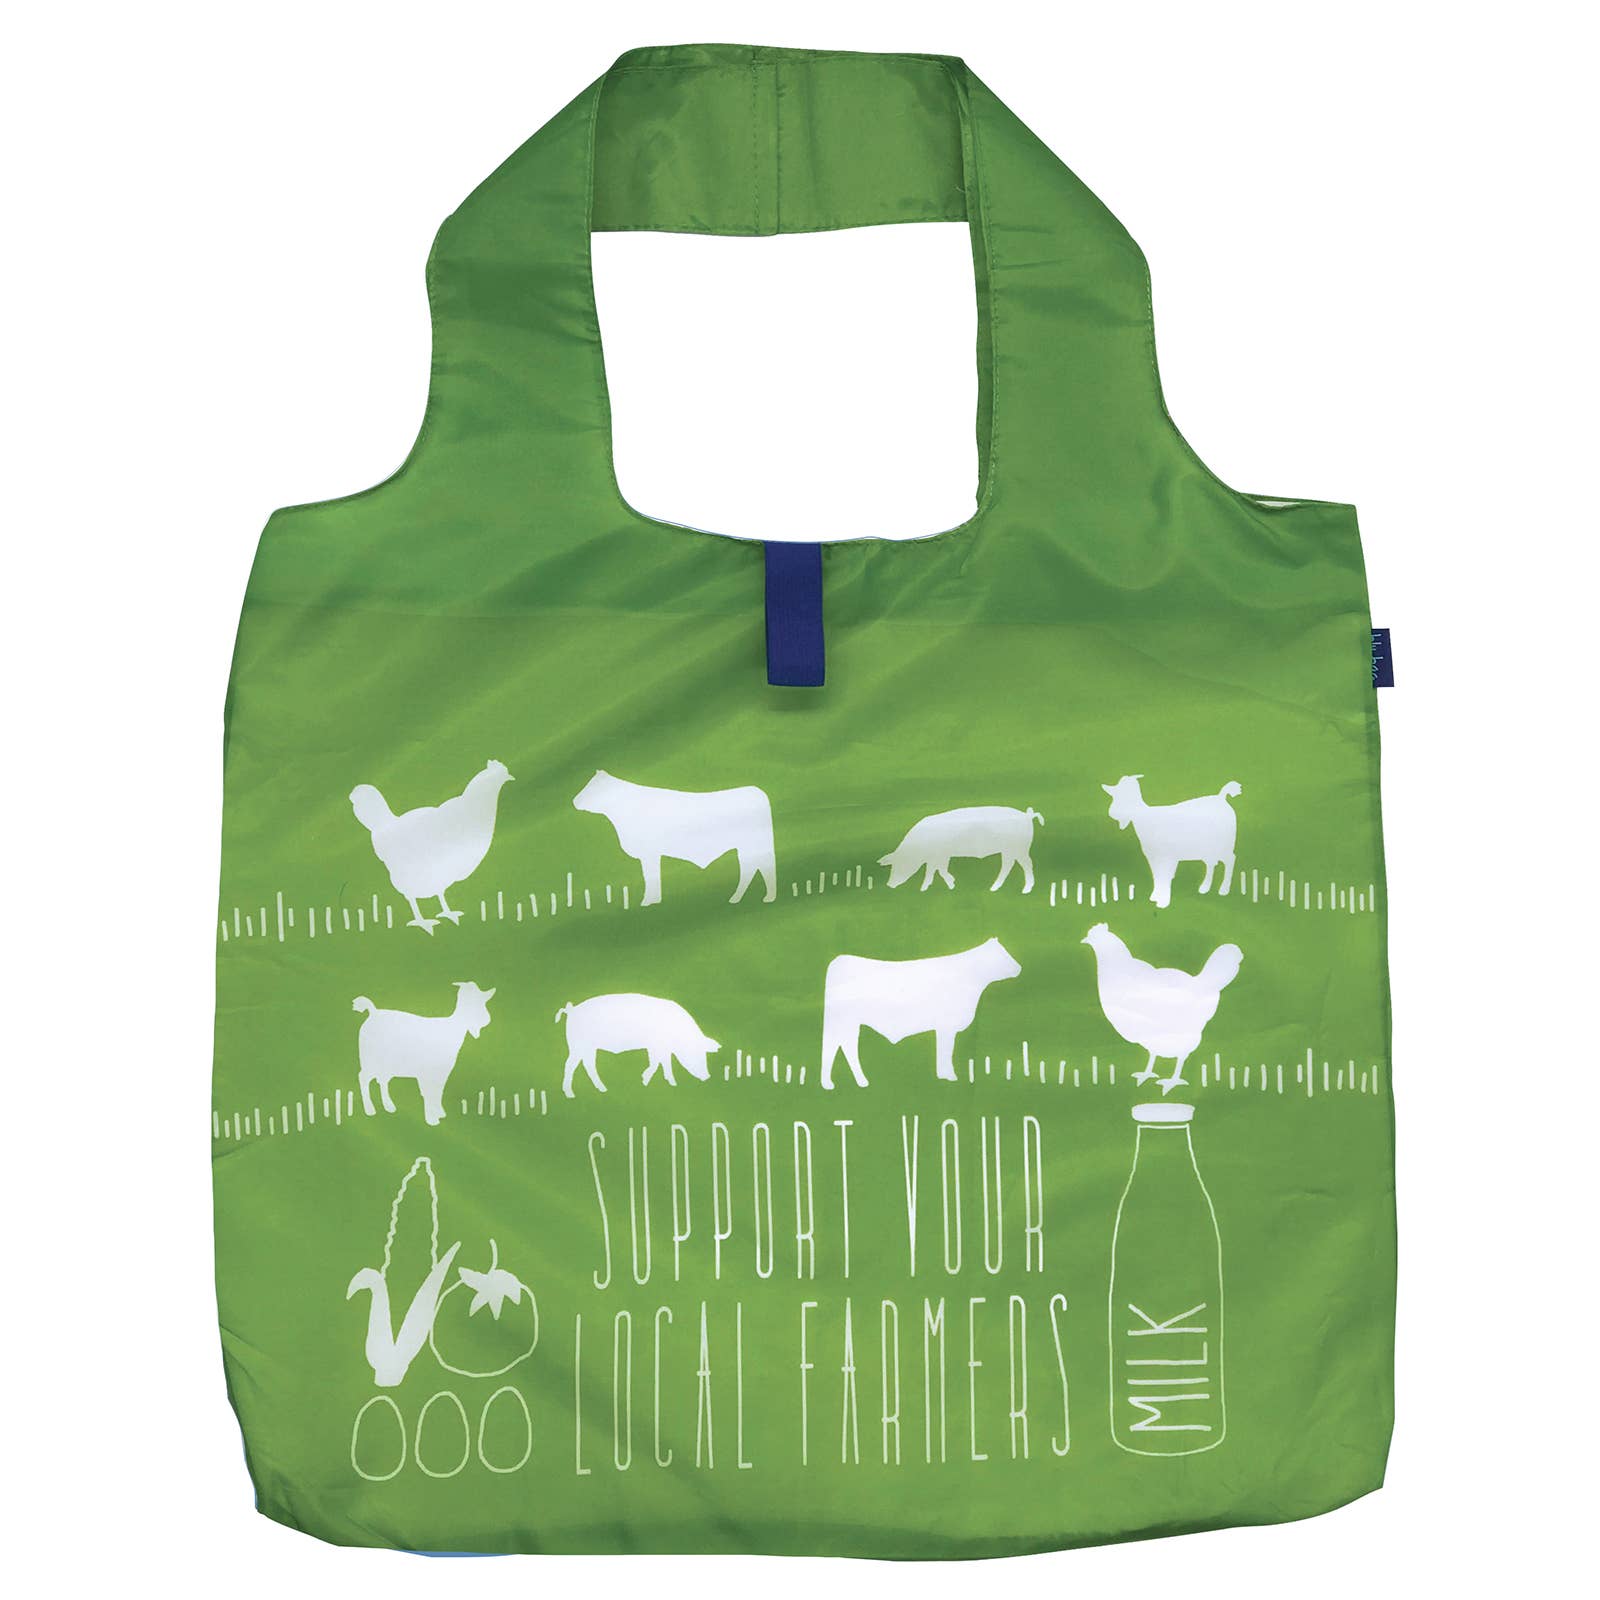 Blu Bags - Eco Friendly, Reusable Grocery Bags & Totes